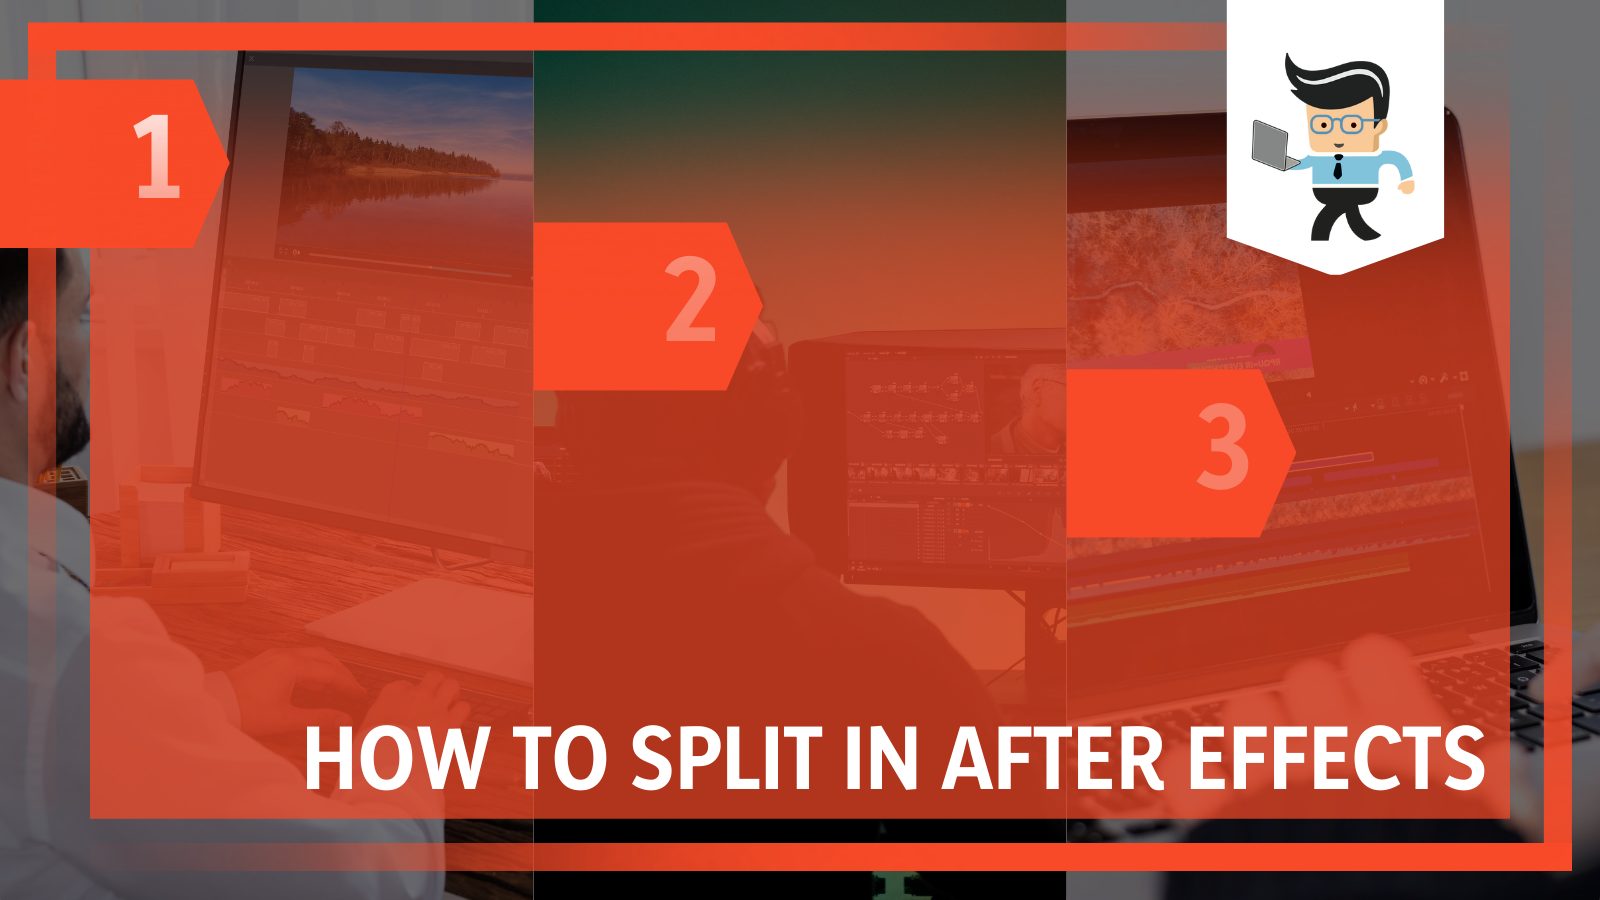 How To Split in After Effects